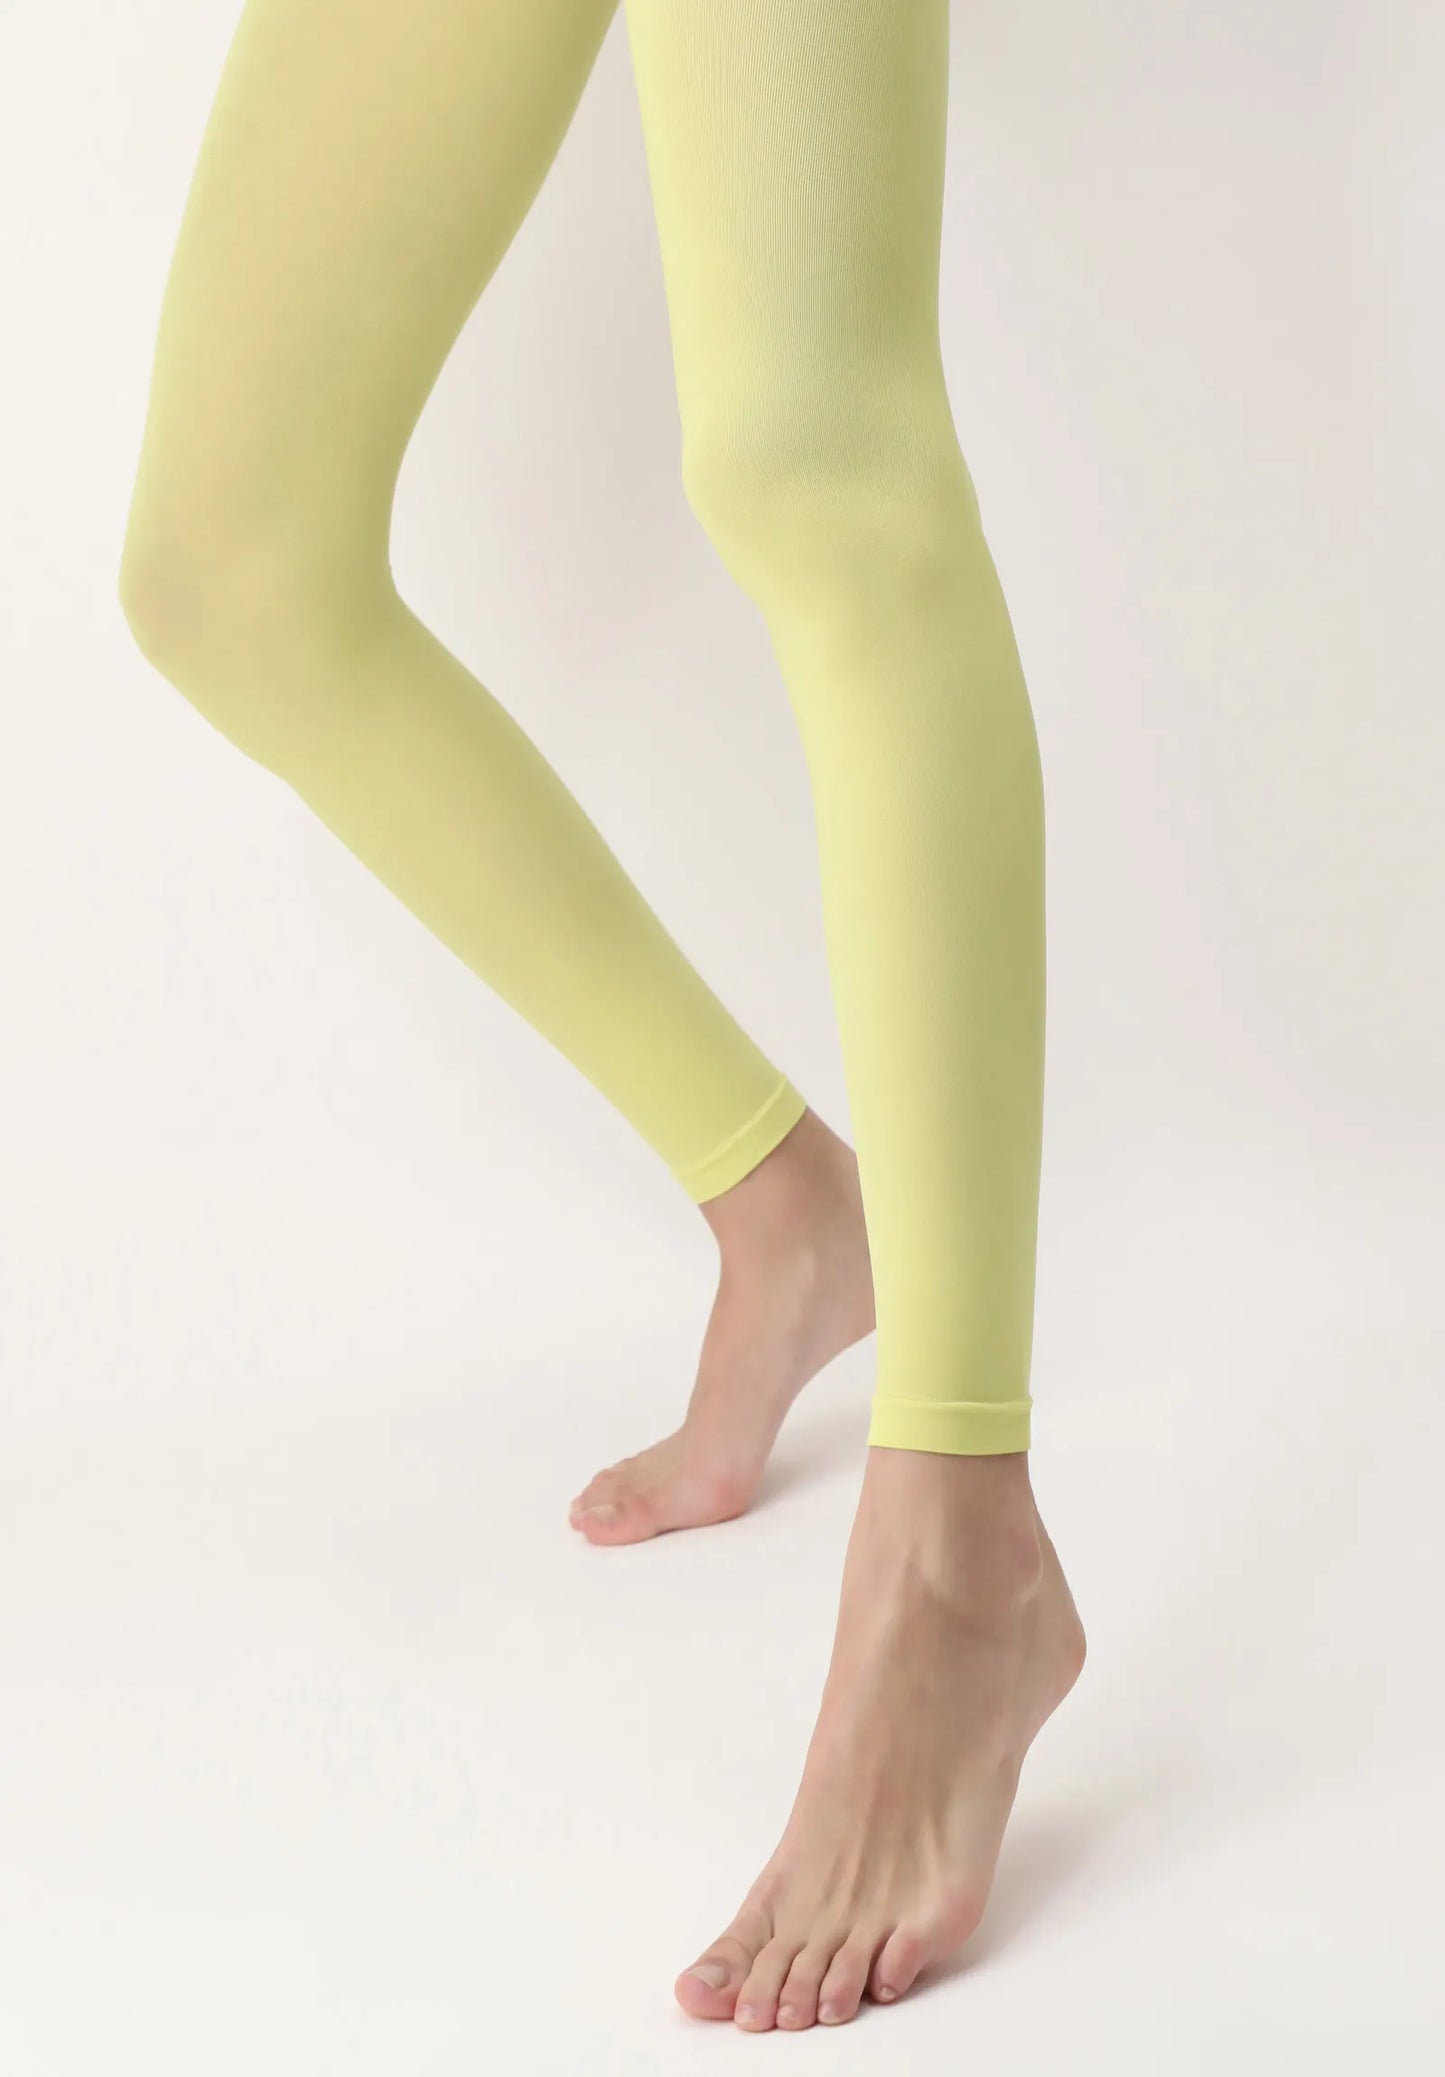 Oroblù All Colors Leggings - Bright citron lime green soft matte opaque footless tights with deep comfort waist band, flat seams and gusset.